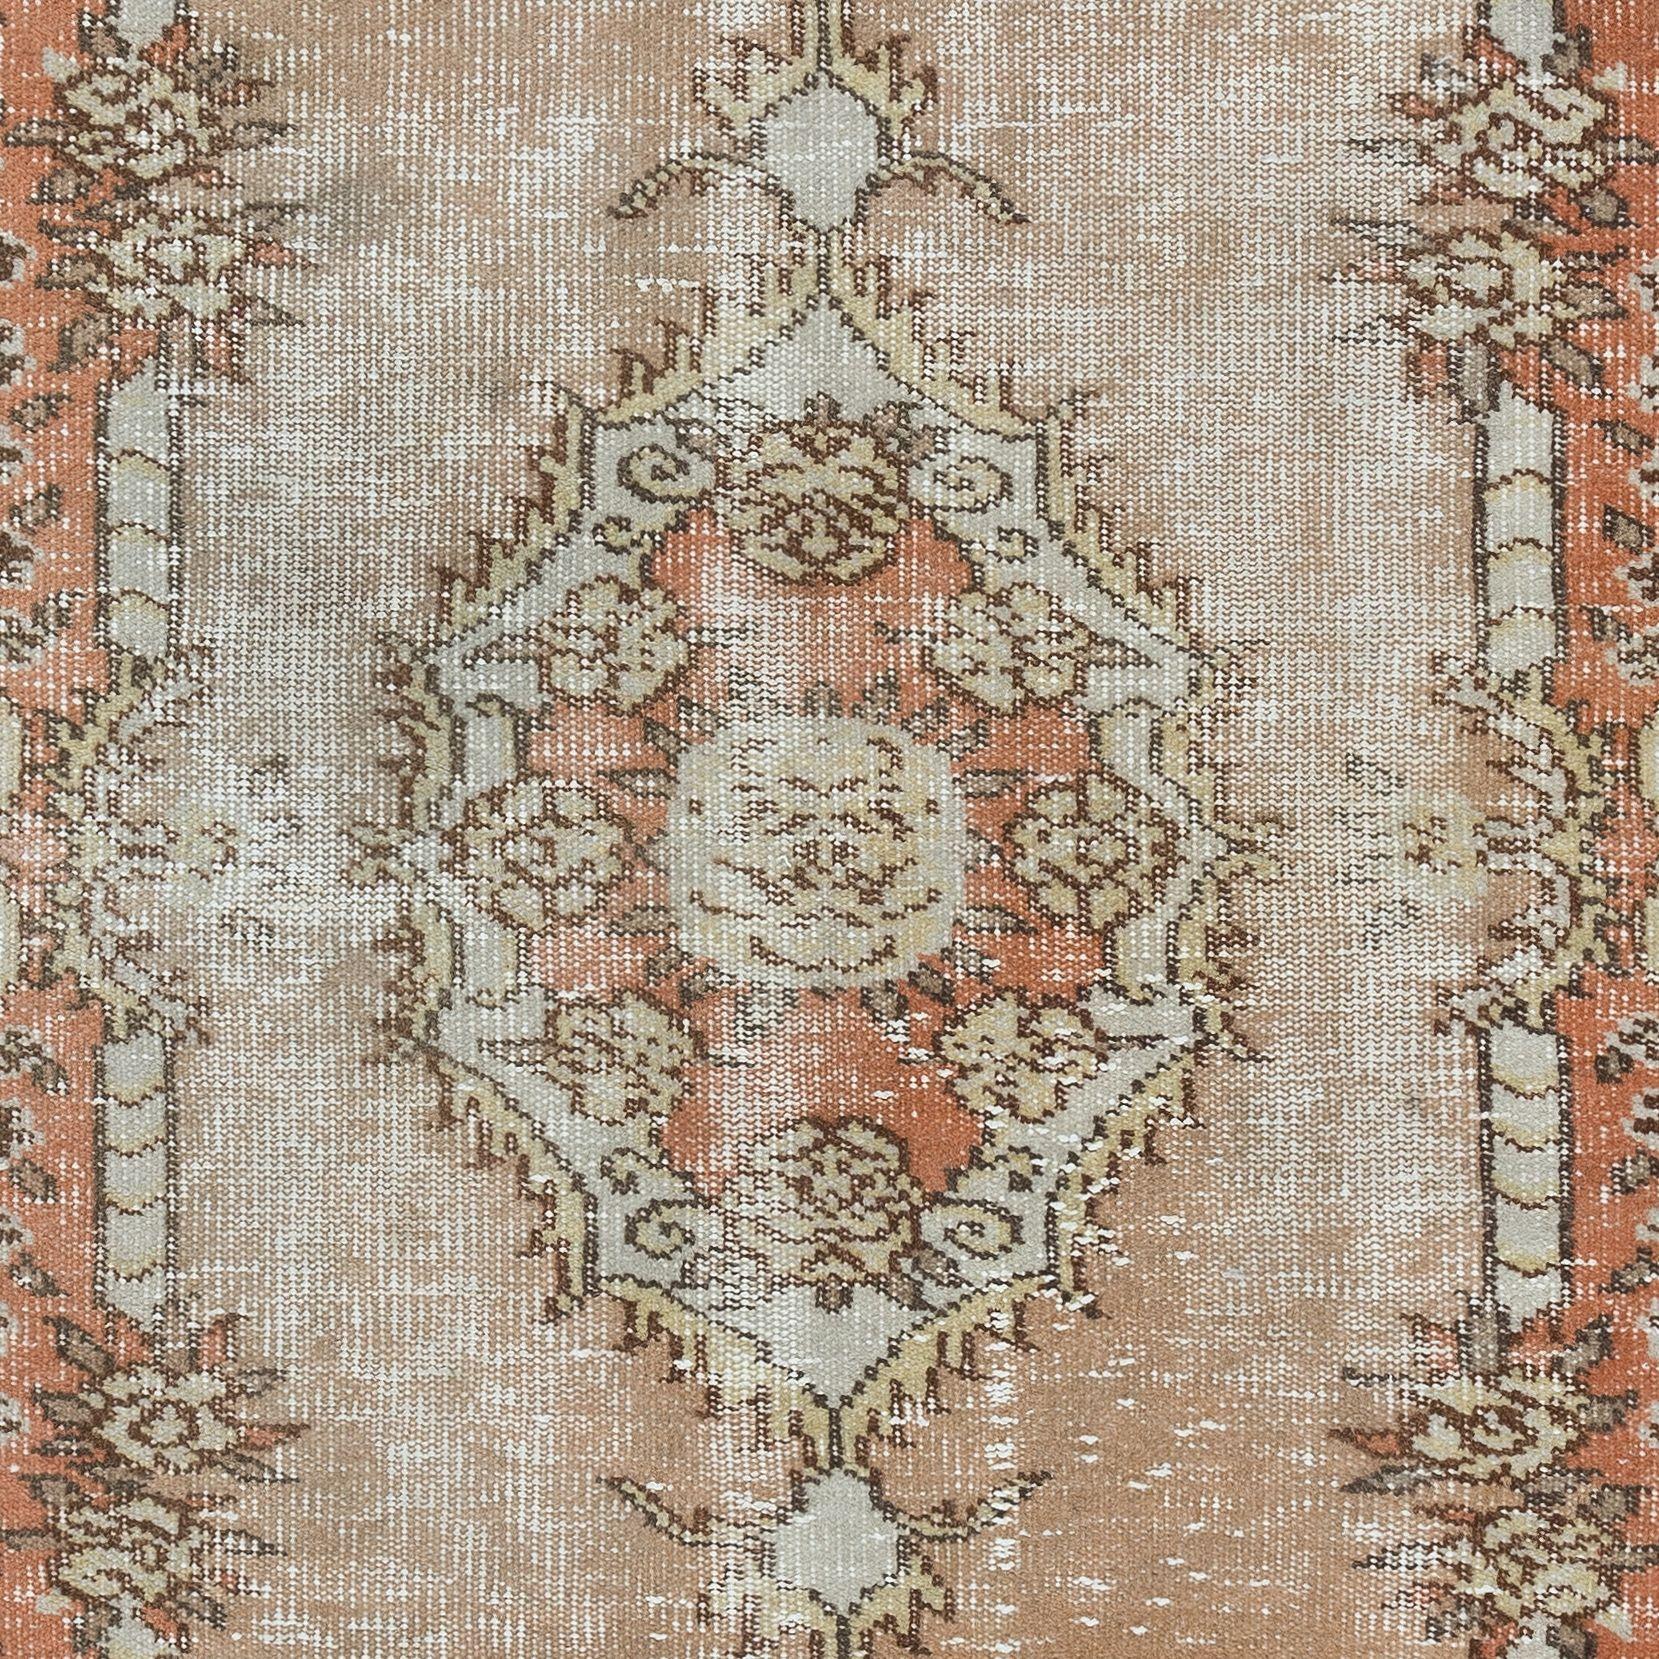 Hand-Woven 3.6x6.7 Ft Vintage Hand Knotted Anatolian Wool Accent Rug in Muted Colors For Sale